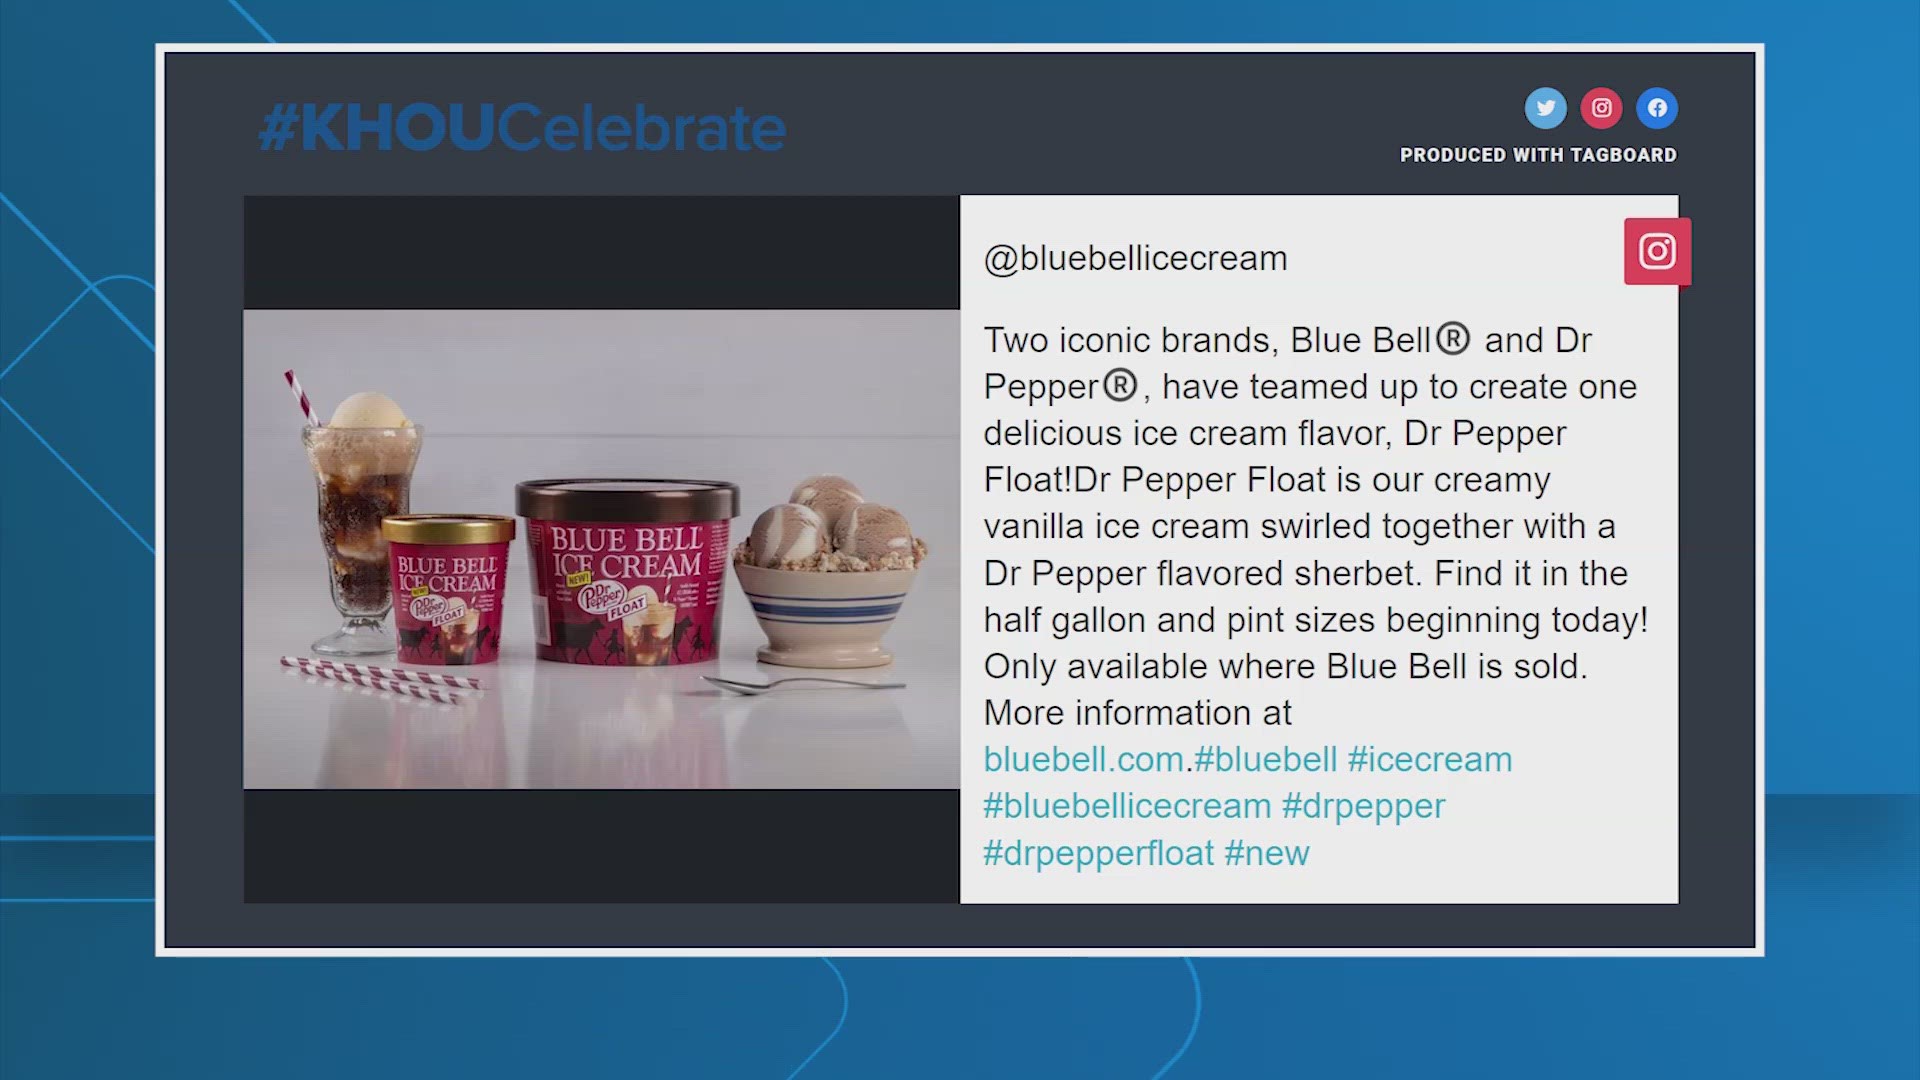 Blue Bell had been teasing a new flavor and now we know what it is -- Dr. Pepper vanilla ice cream!